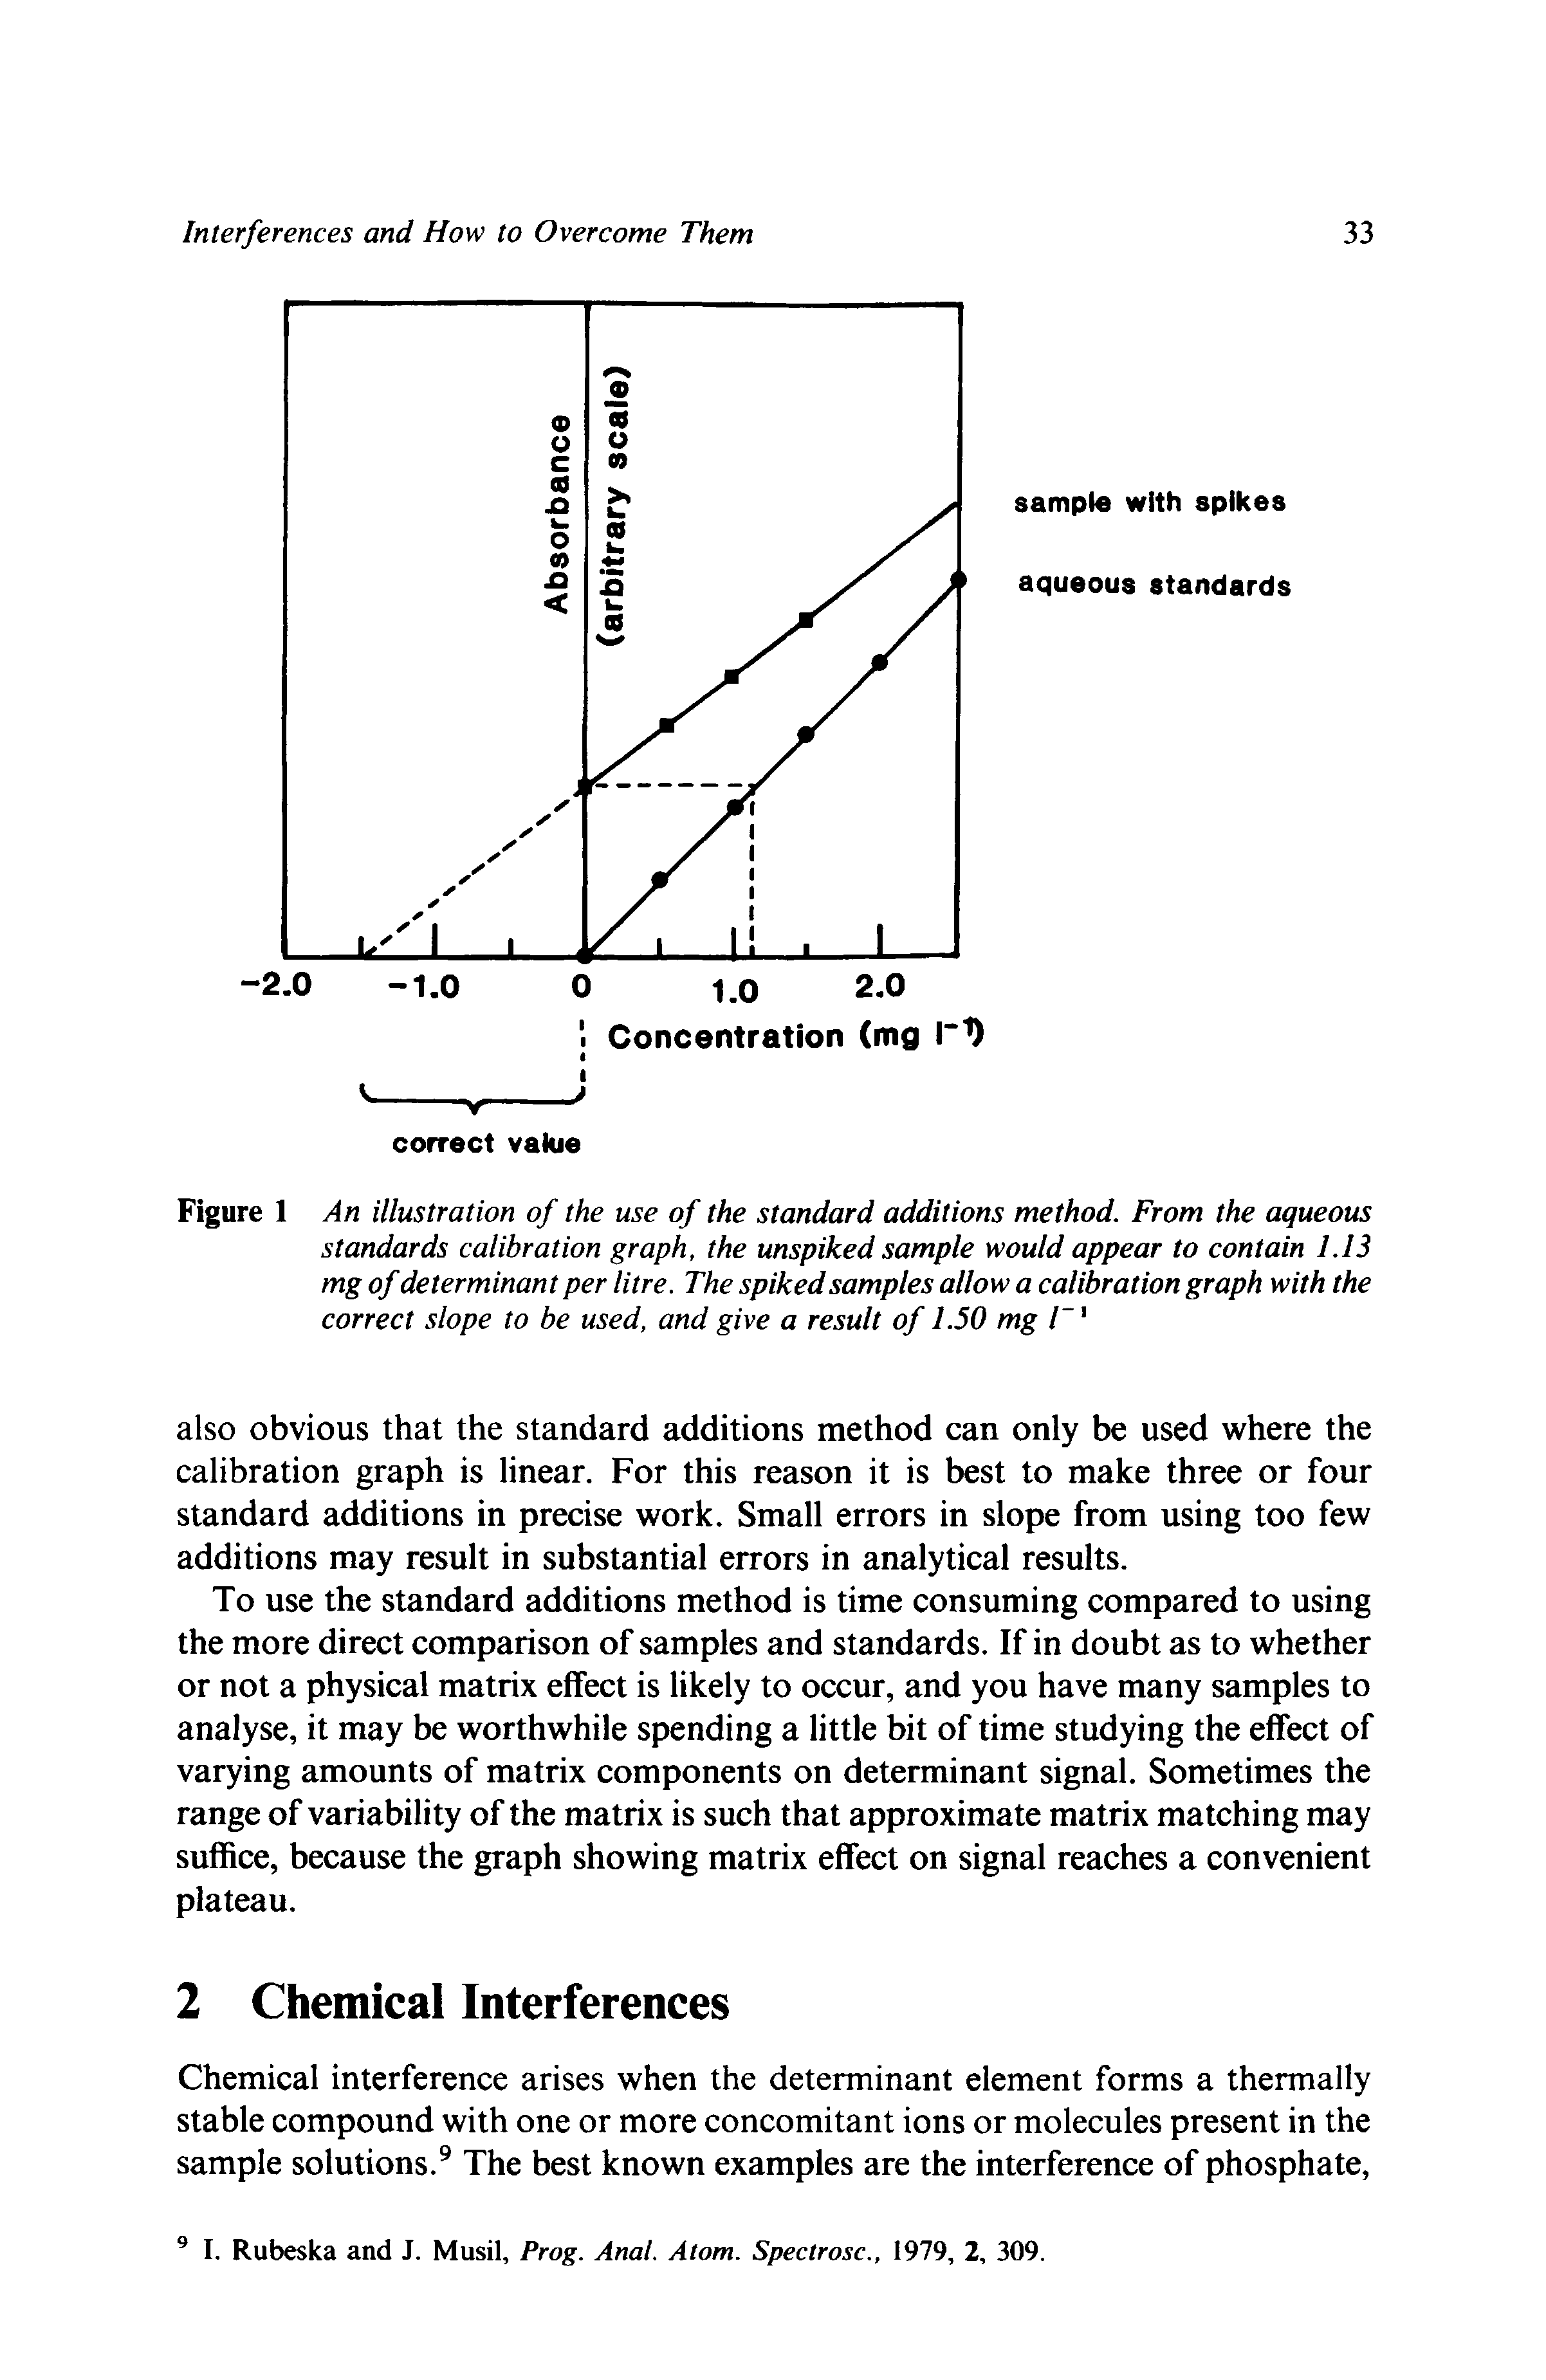 Figure 1 An illustration of the use of the standard additions method. From the aqueous standards calibration graph, the unspiked sample would appear to contain LI3 mg of determinant per litre. The spiked samples allow a calibration graph with the correct slope to be used, and give a result of 1.50 mg l 1...